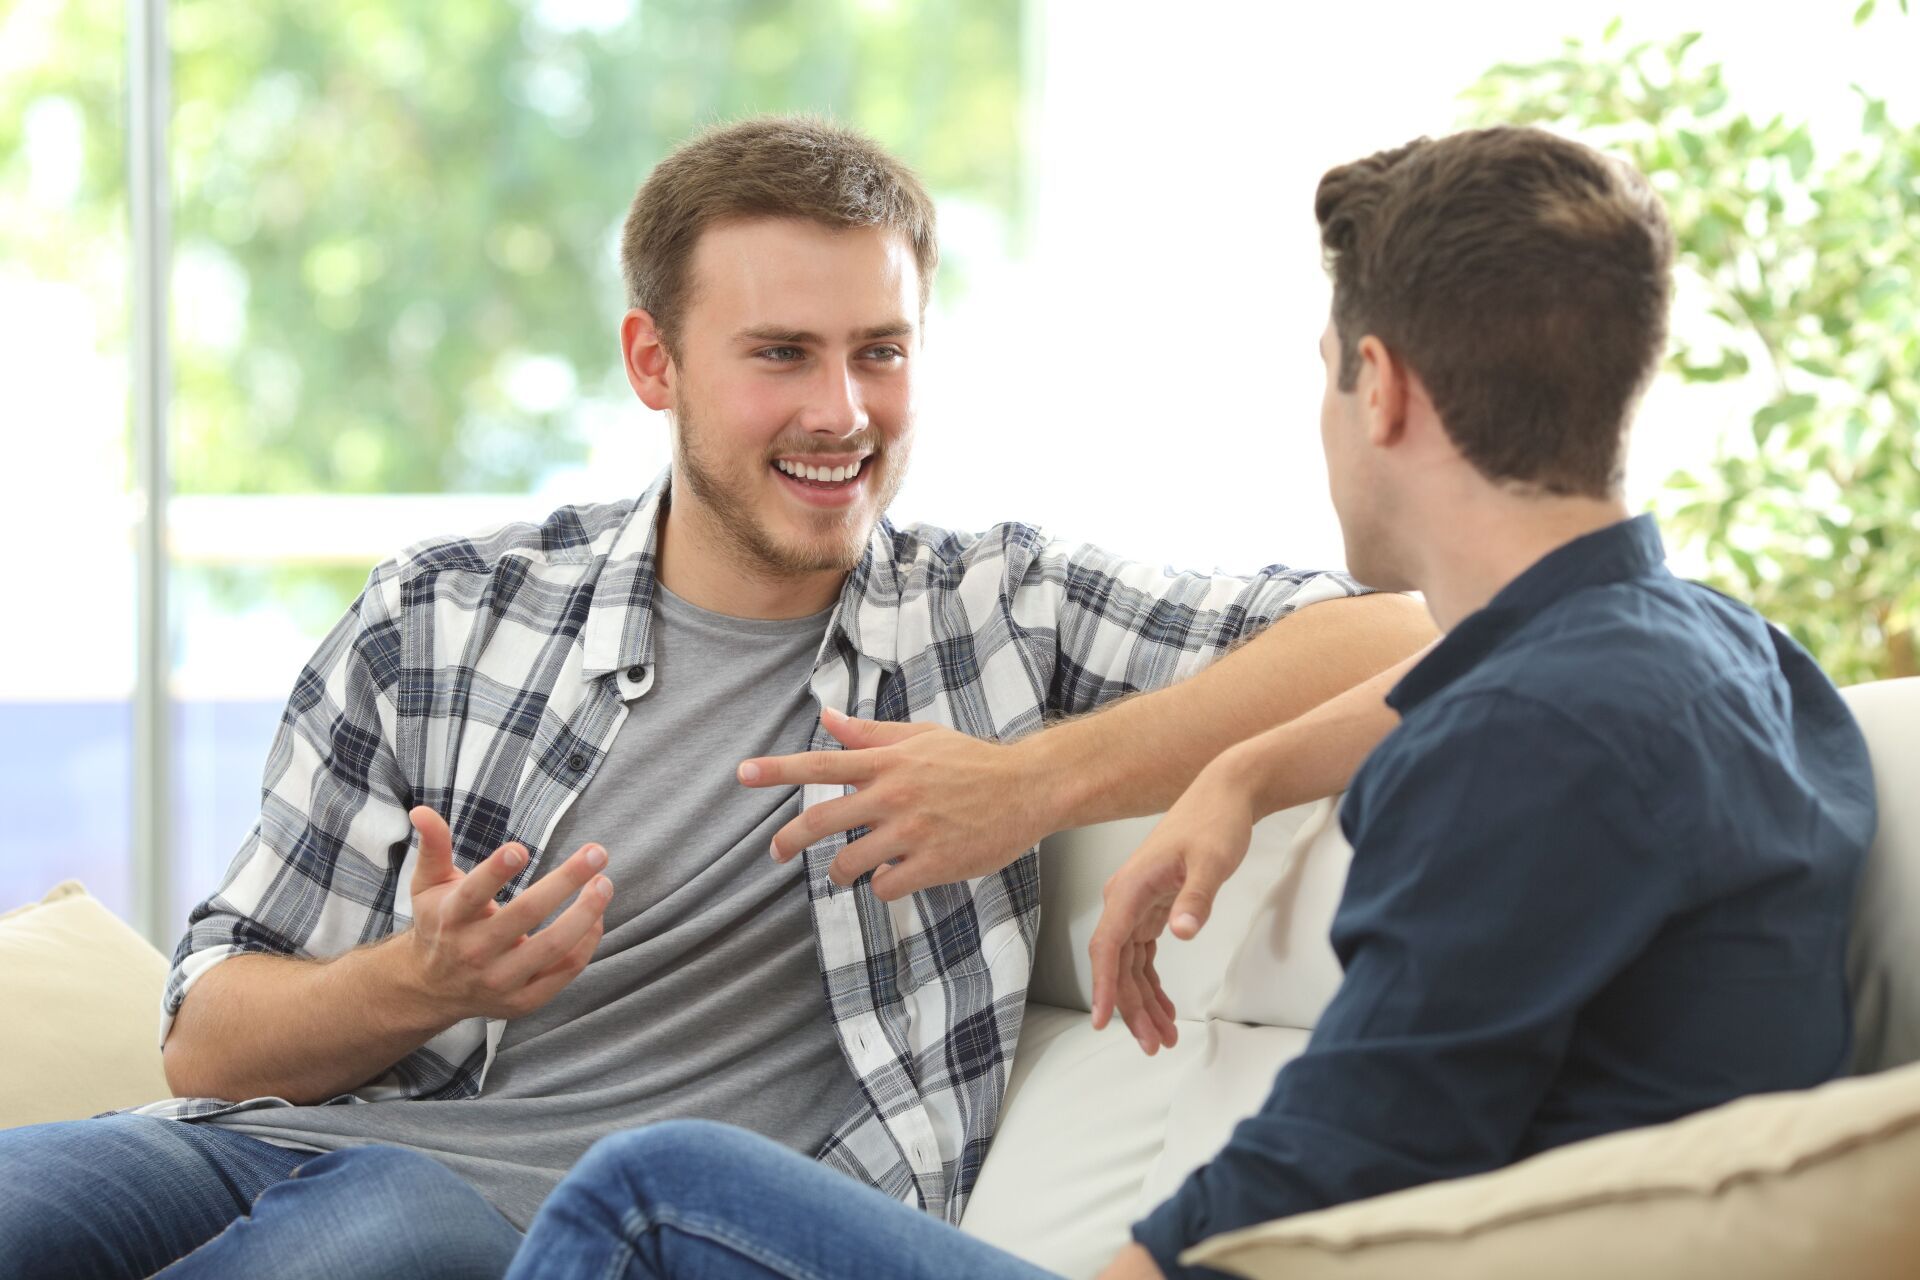 Men in counselling Toowoomba